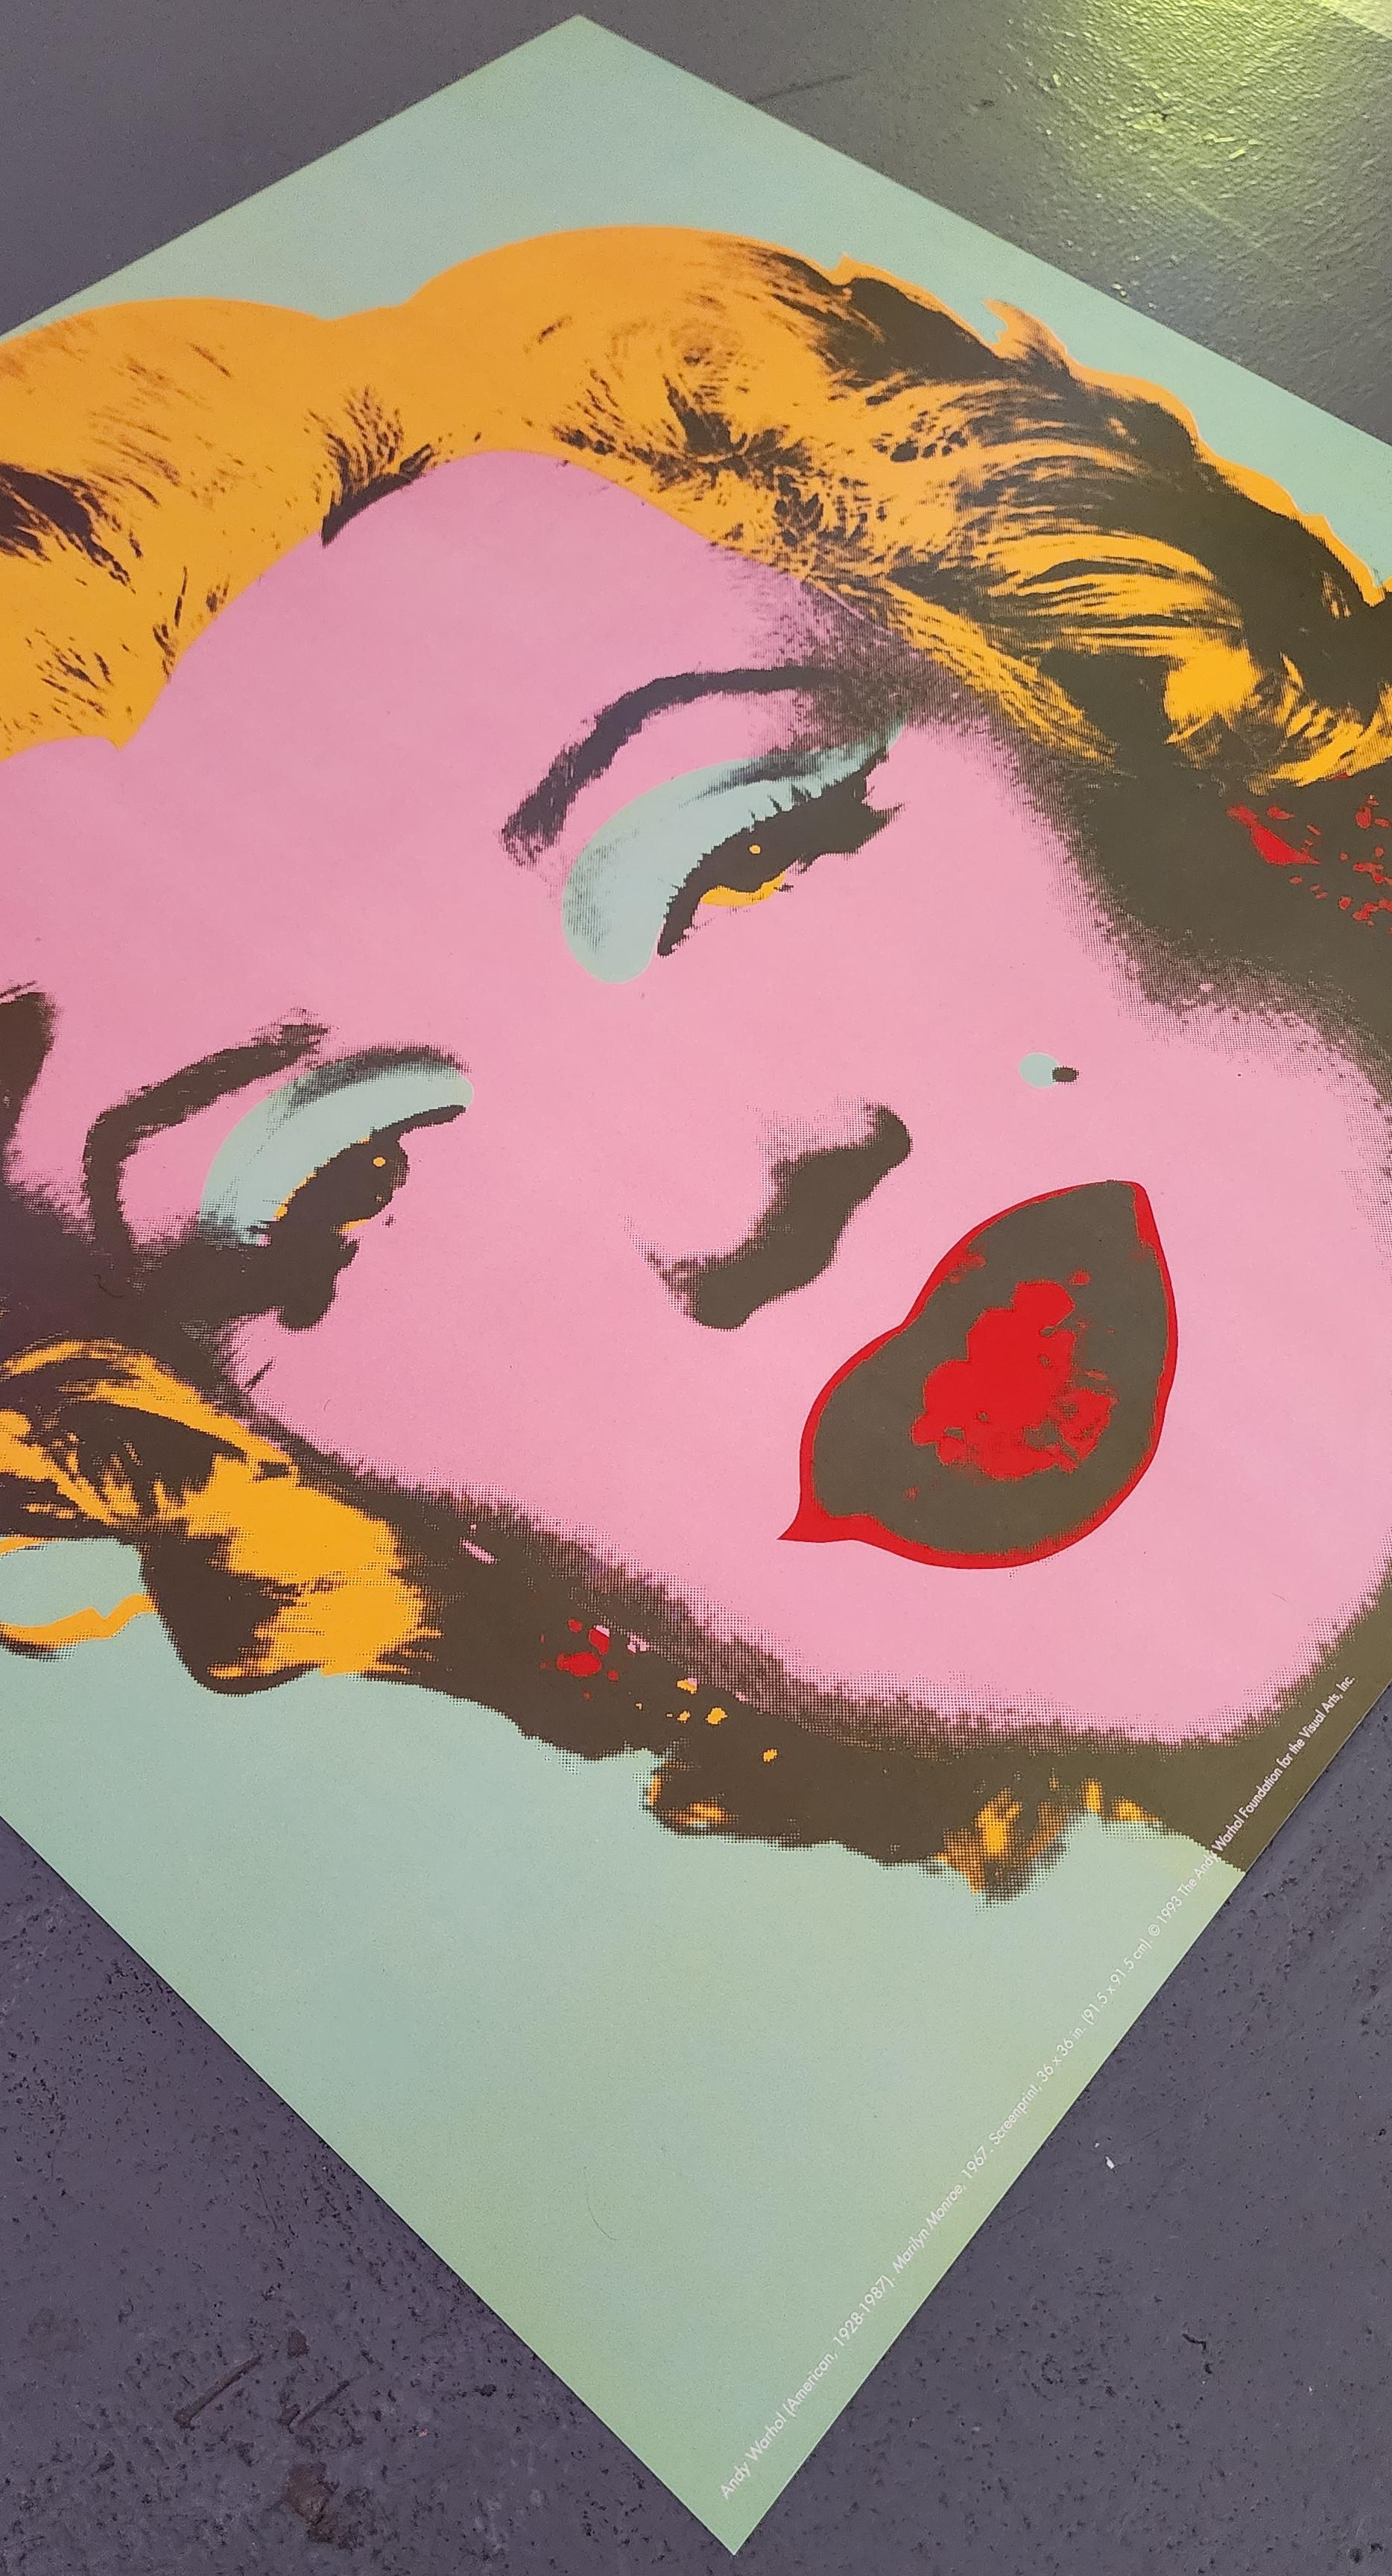 Andy Warhol (after)
Marilyn, 1967 (Green) (Pop Art, Visual Art Movement, Celebrity Culture, Artistic Expression)
Year: 1993
Poster print on heavy paper (Offset)
Size: 25.5×25.4in 
Authorized by the Andy Warhol Foundation for the Visual Arts,